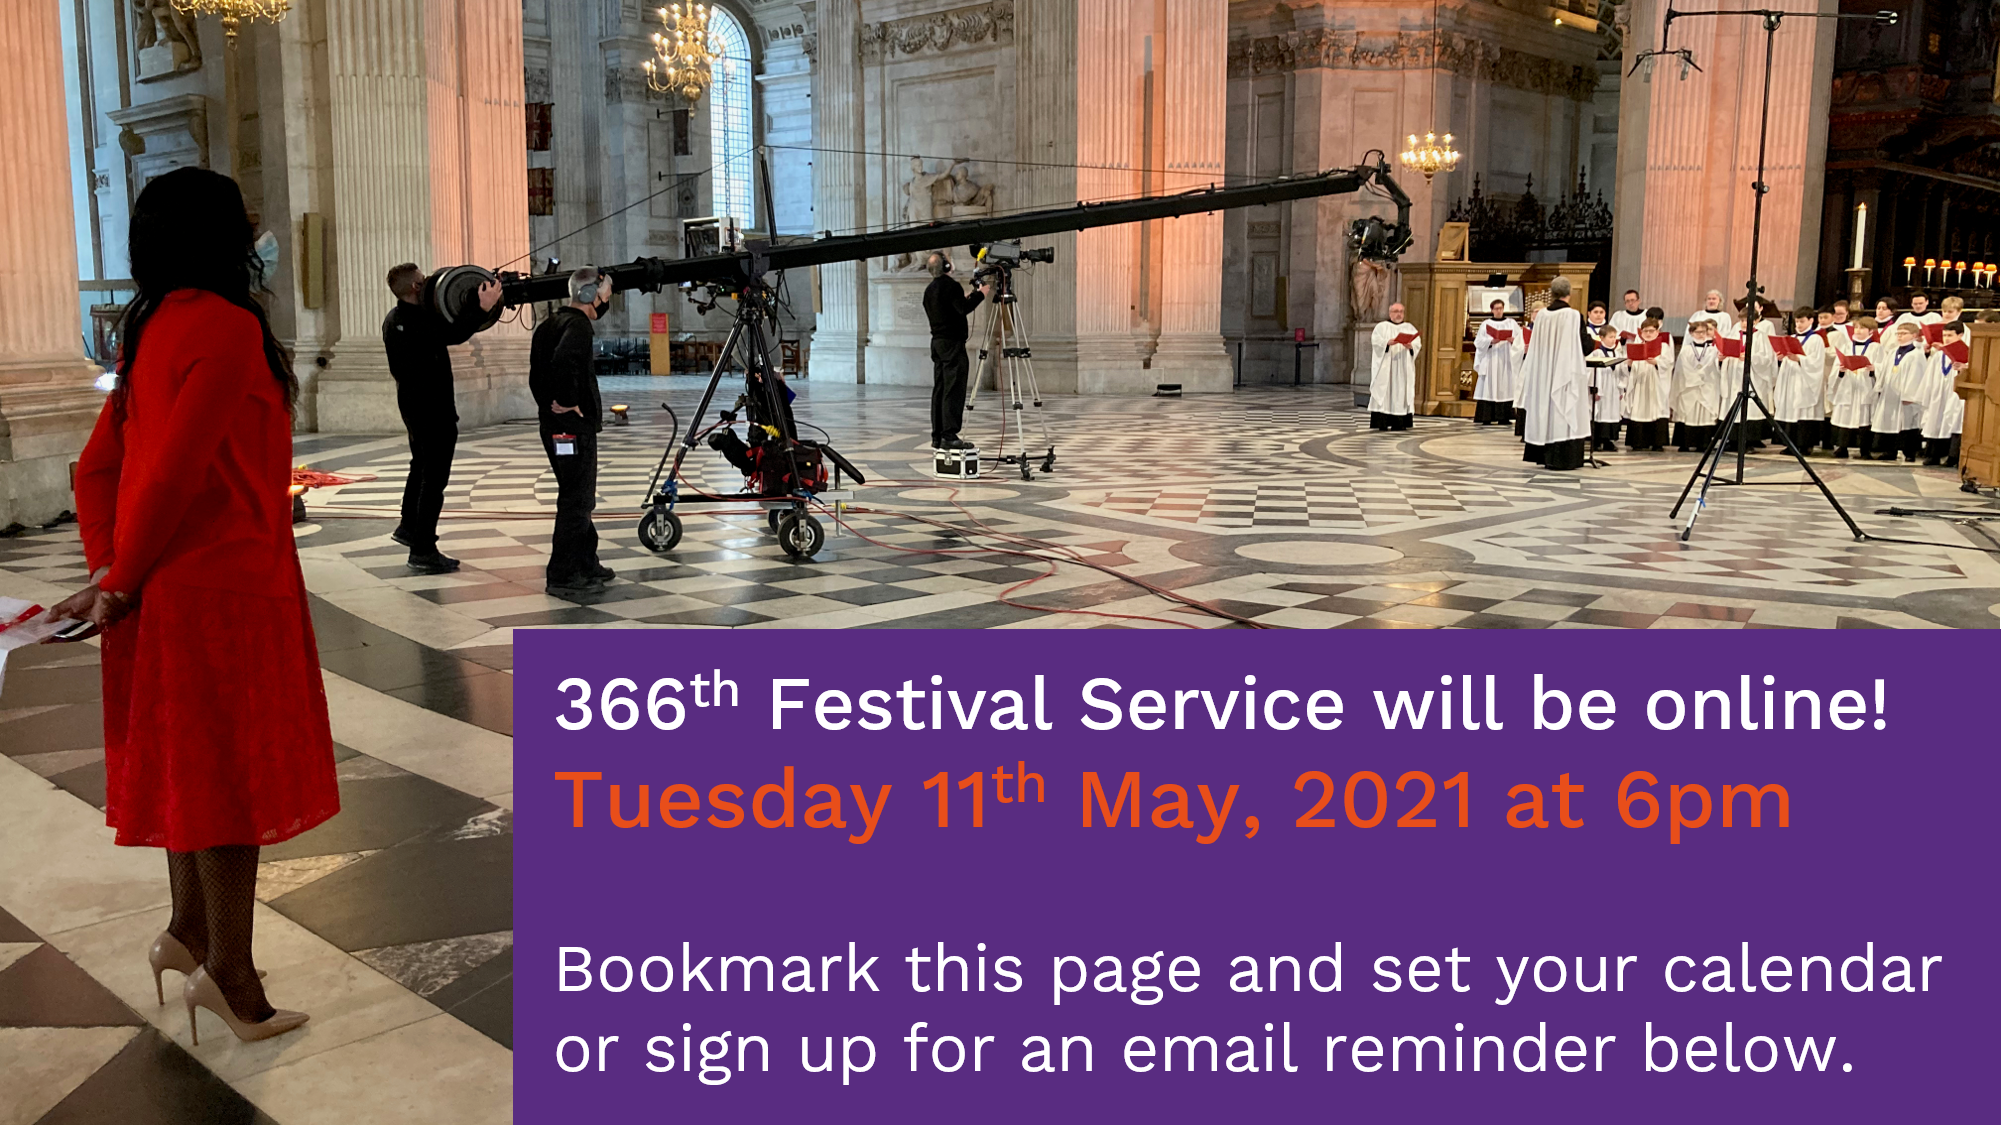 366th Festival Service will be online!